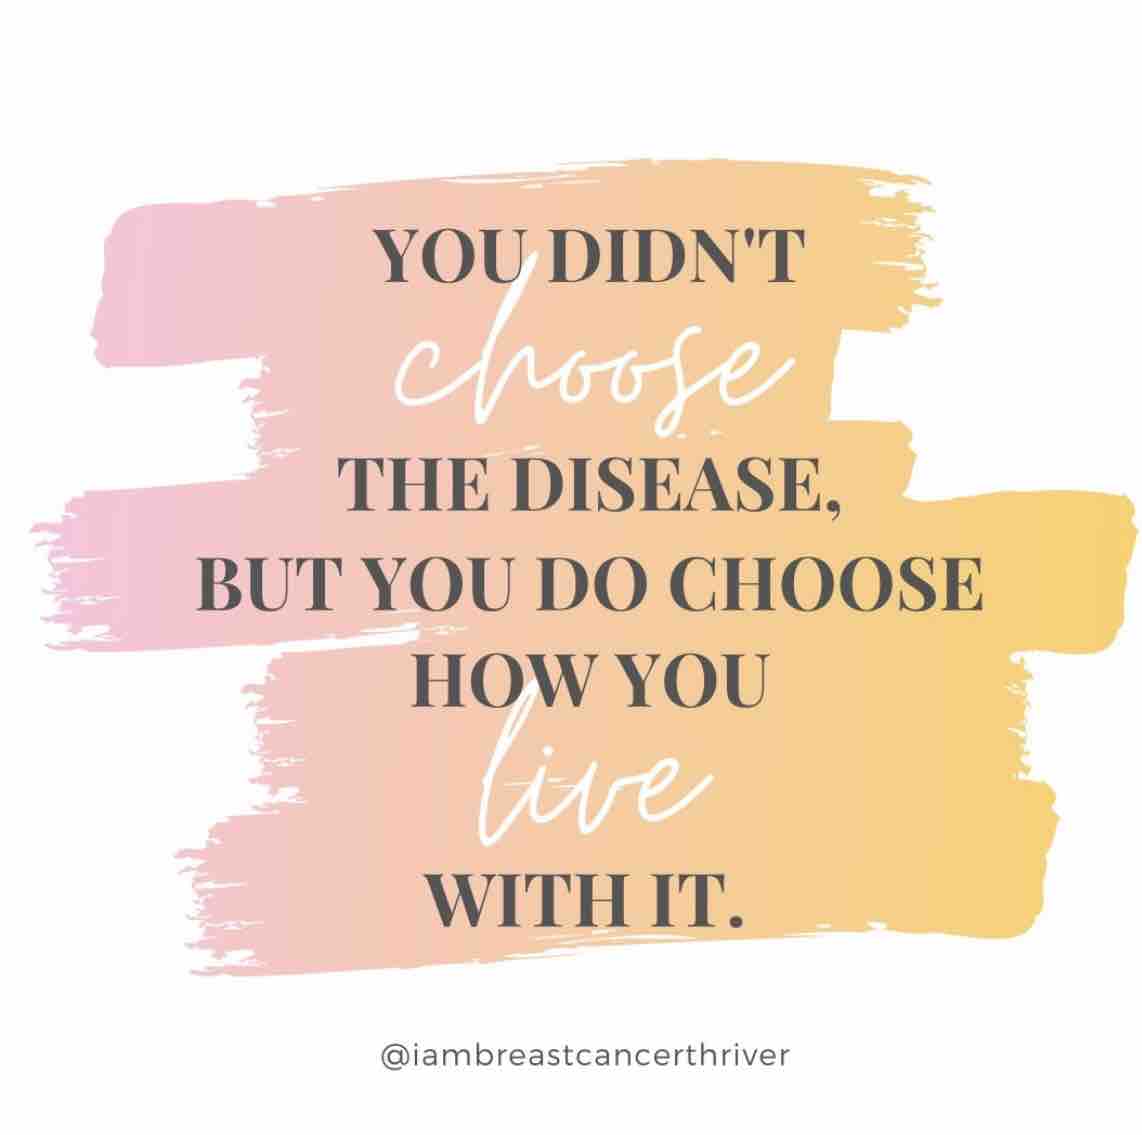 Choices - they are yours #bcsm #breastcancer #mbc #mindsetmatters #selflove #inspirationalquotes